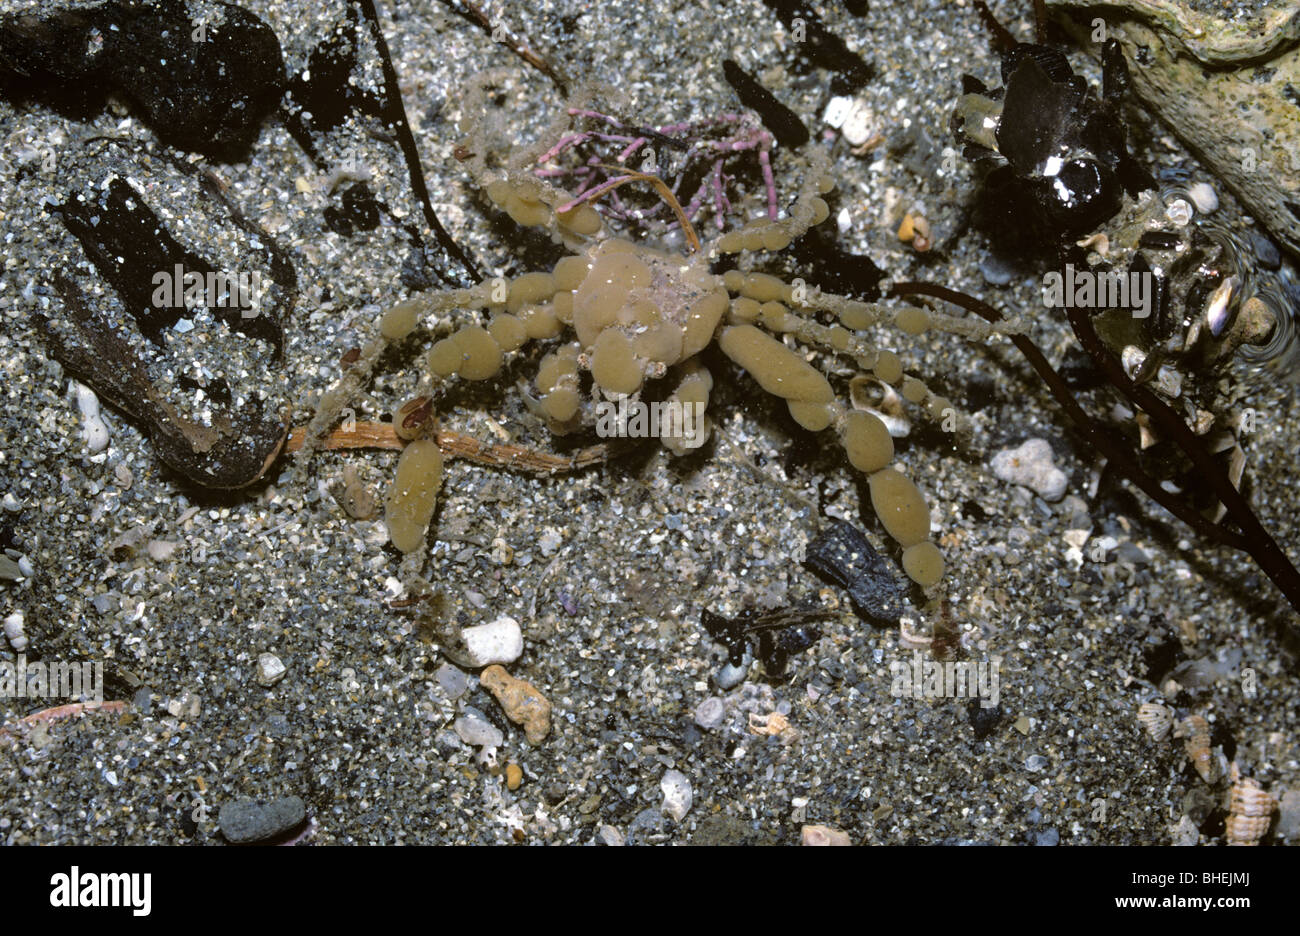 Scorpion spider crab (Inachus dorsettensis: Majidae), camouflaged with bits of sponge, in a rockpool UK Stock Photo